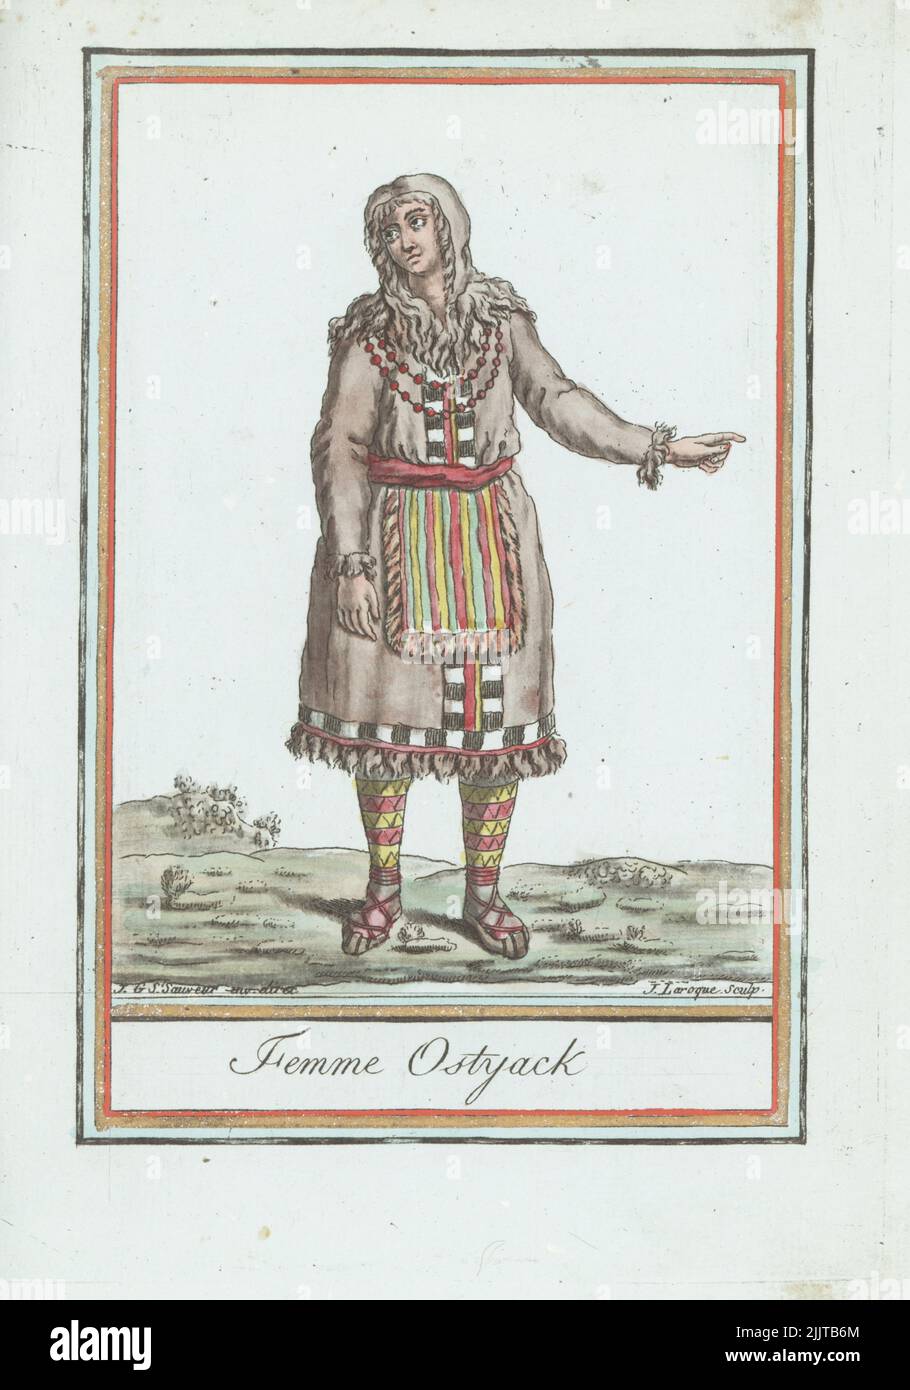 Ostyak woman of Siberia: Khanty or Ket people. In hooded coat of bear or reindeer skin, with beaded necklaces, striped apron, leggings and leather bootlets. Femme Ostyack. Handcoloured copperplate engraving by J. Laroque after a design by Jacques Grasset de Saint-Sauveur from his Encyclopedie des voyages, Encyclopedia of Voyages, Bordeaux, France, 1792. Stock Photo